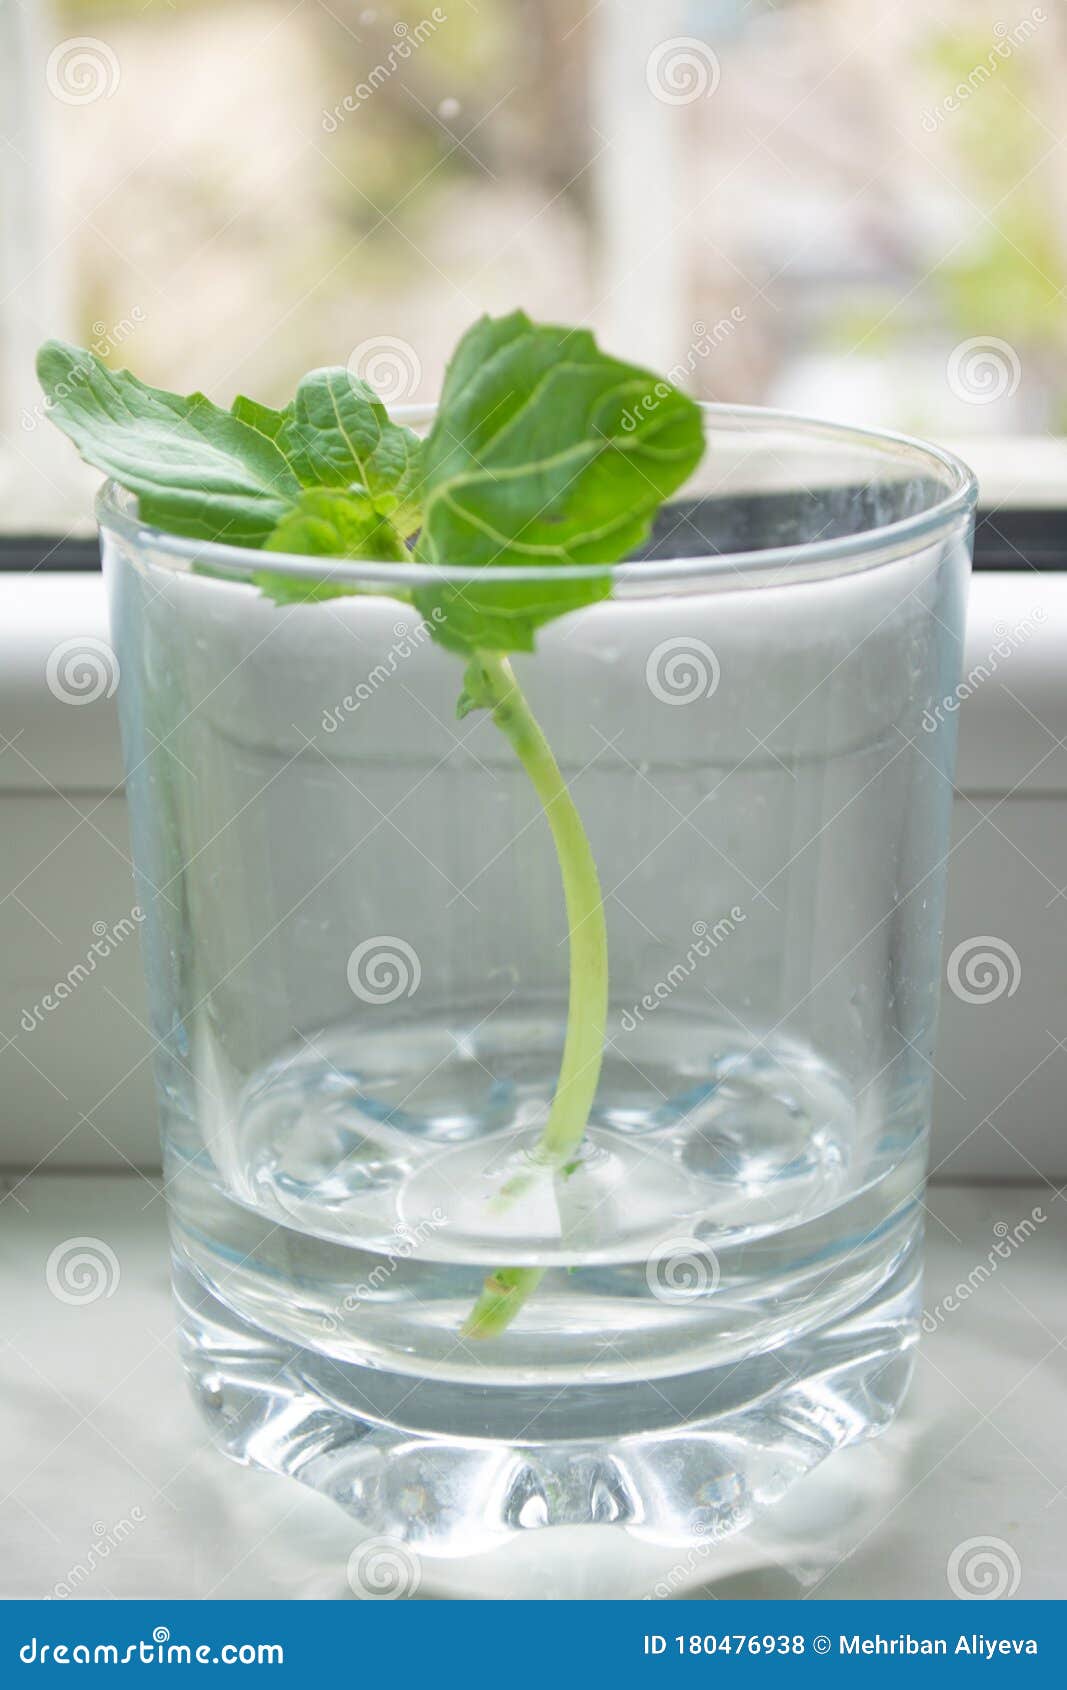 rooting/ propagating green basil in a jar of water